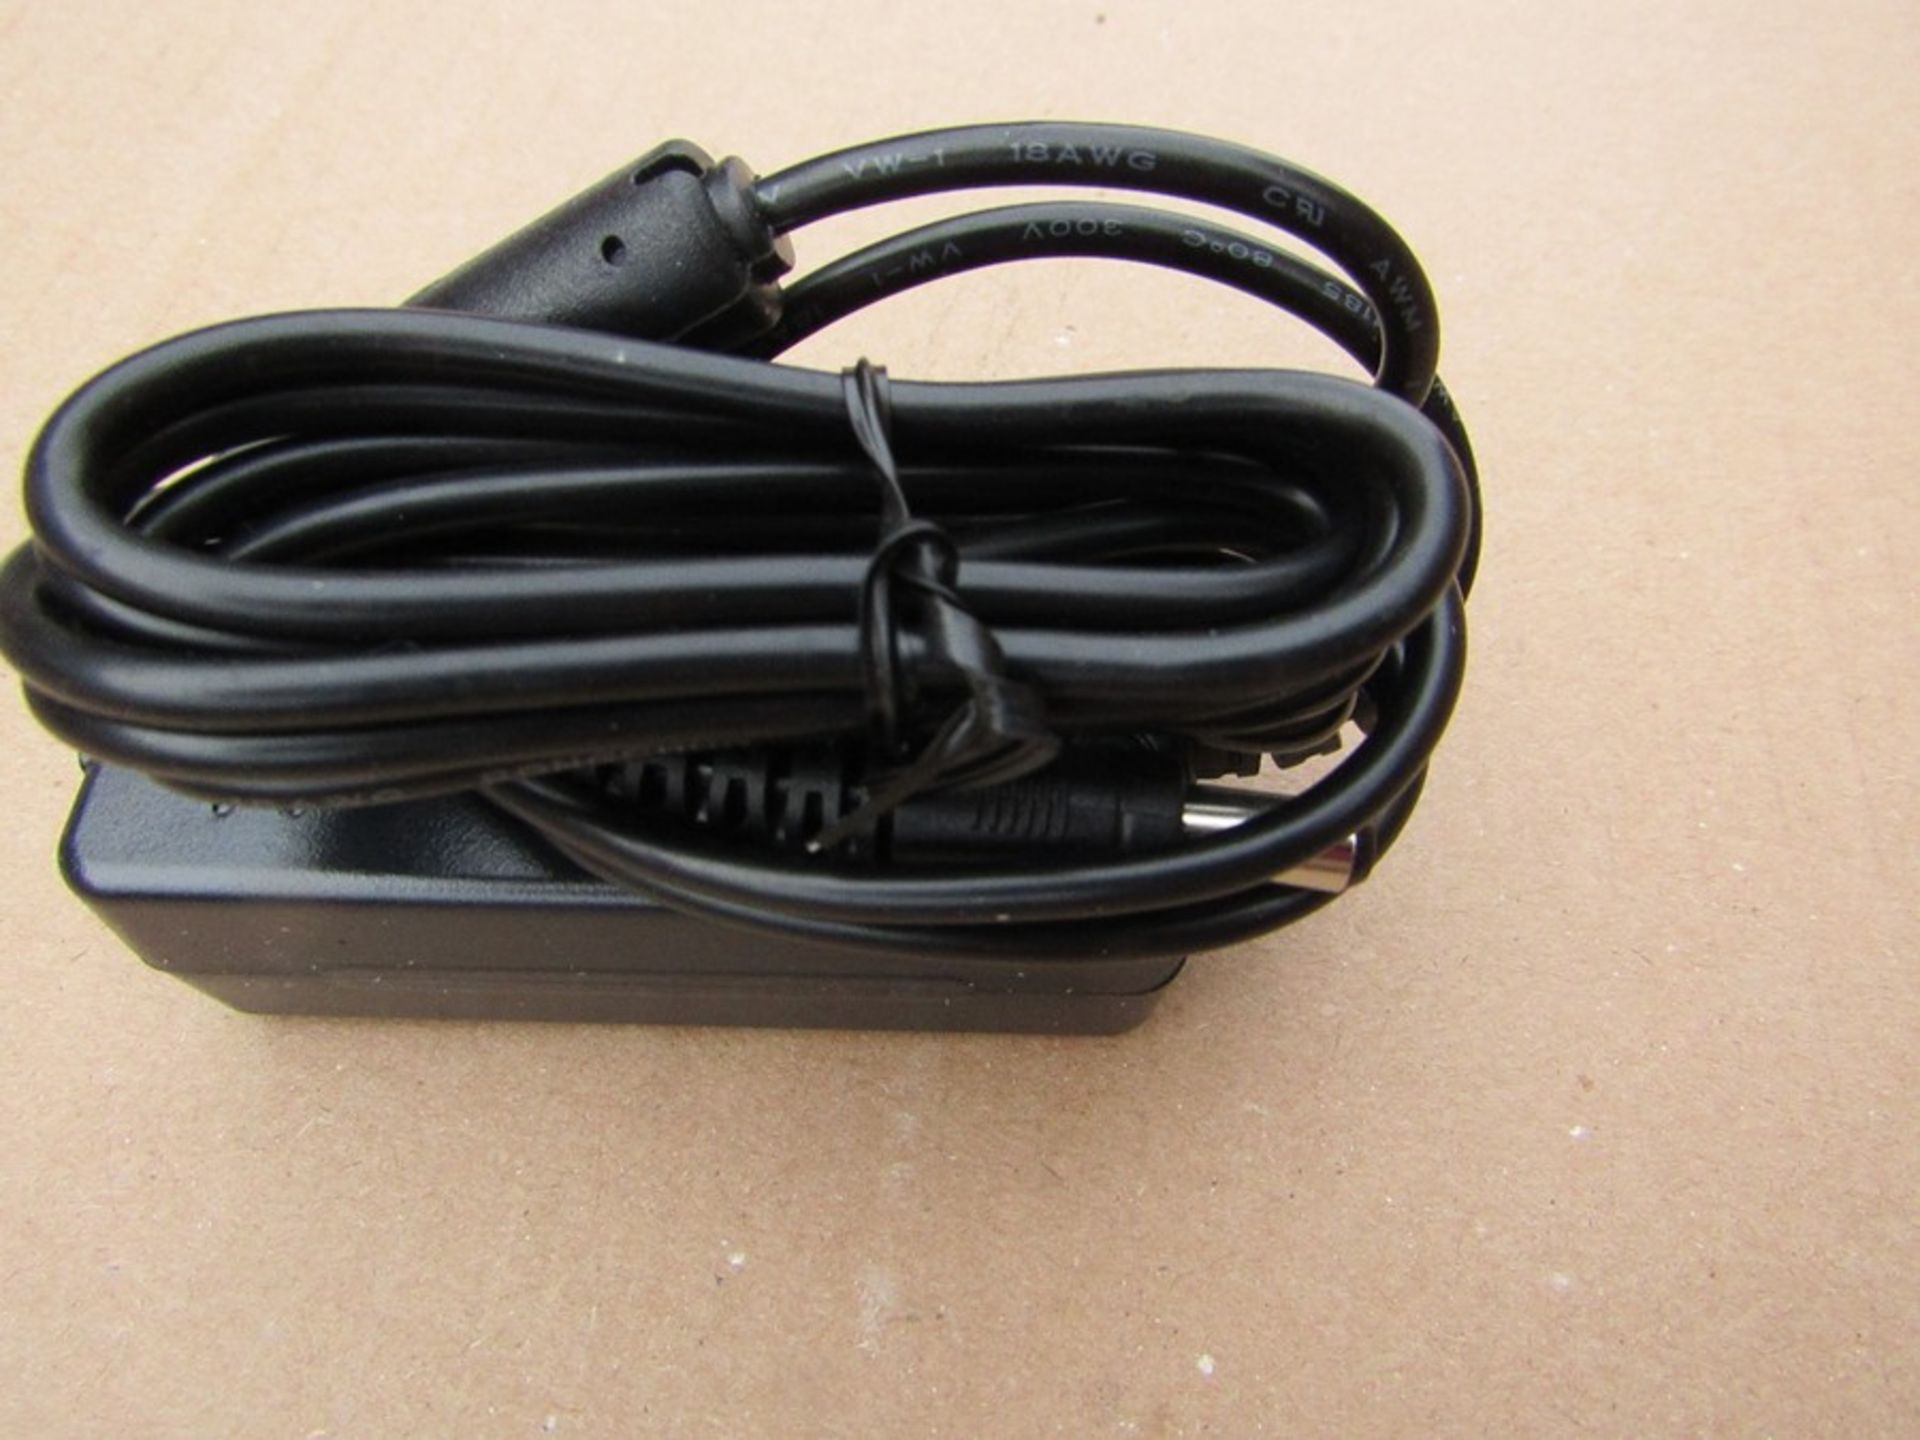 40 x 5V dc Power Supply for Laptop, Netbook or Notebook, 2.5A, 2-Pin - B714 435869